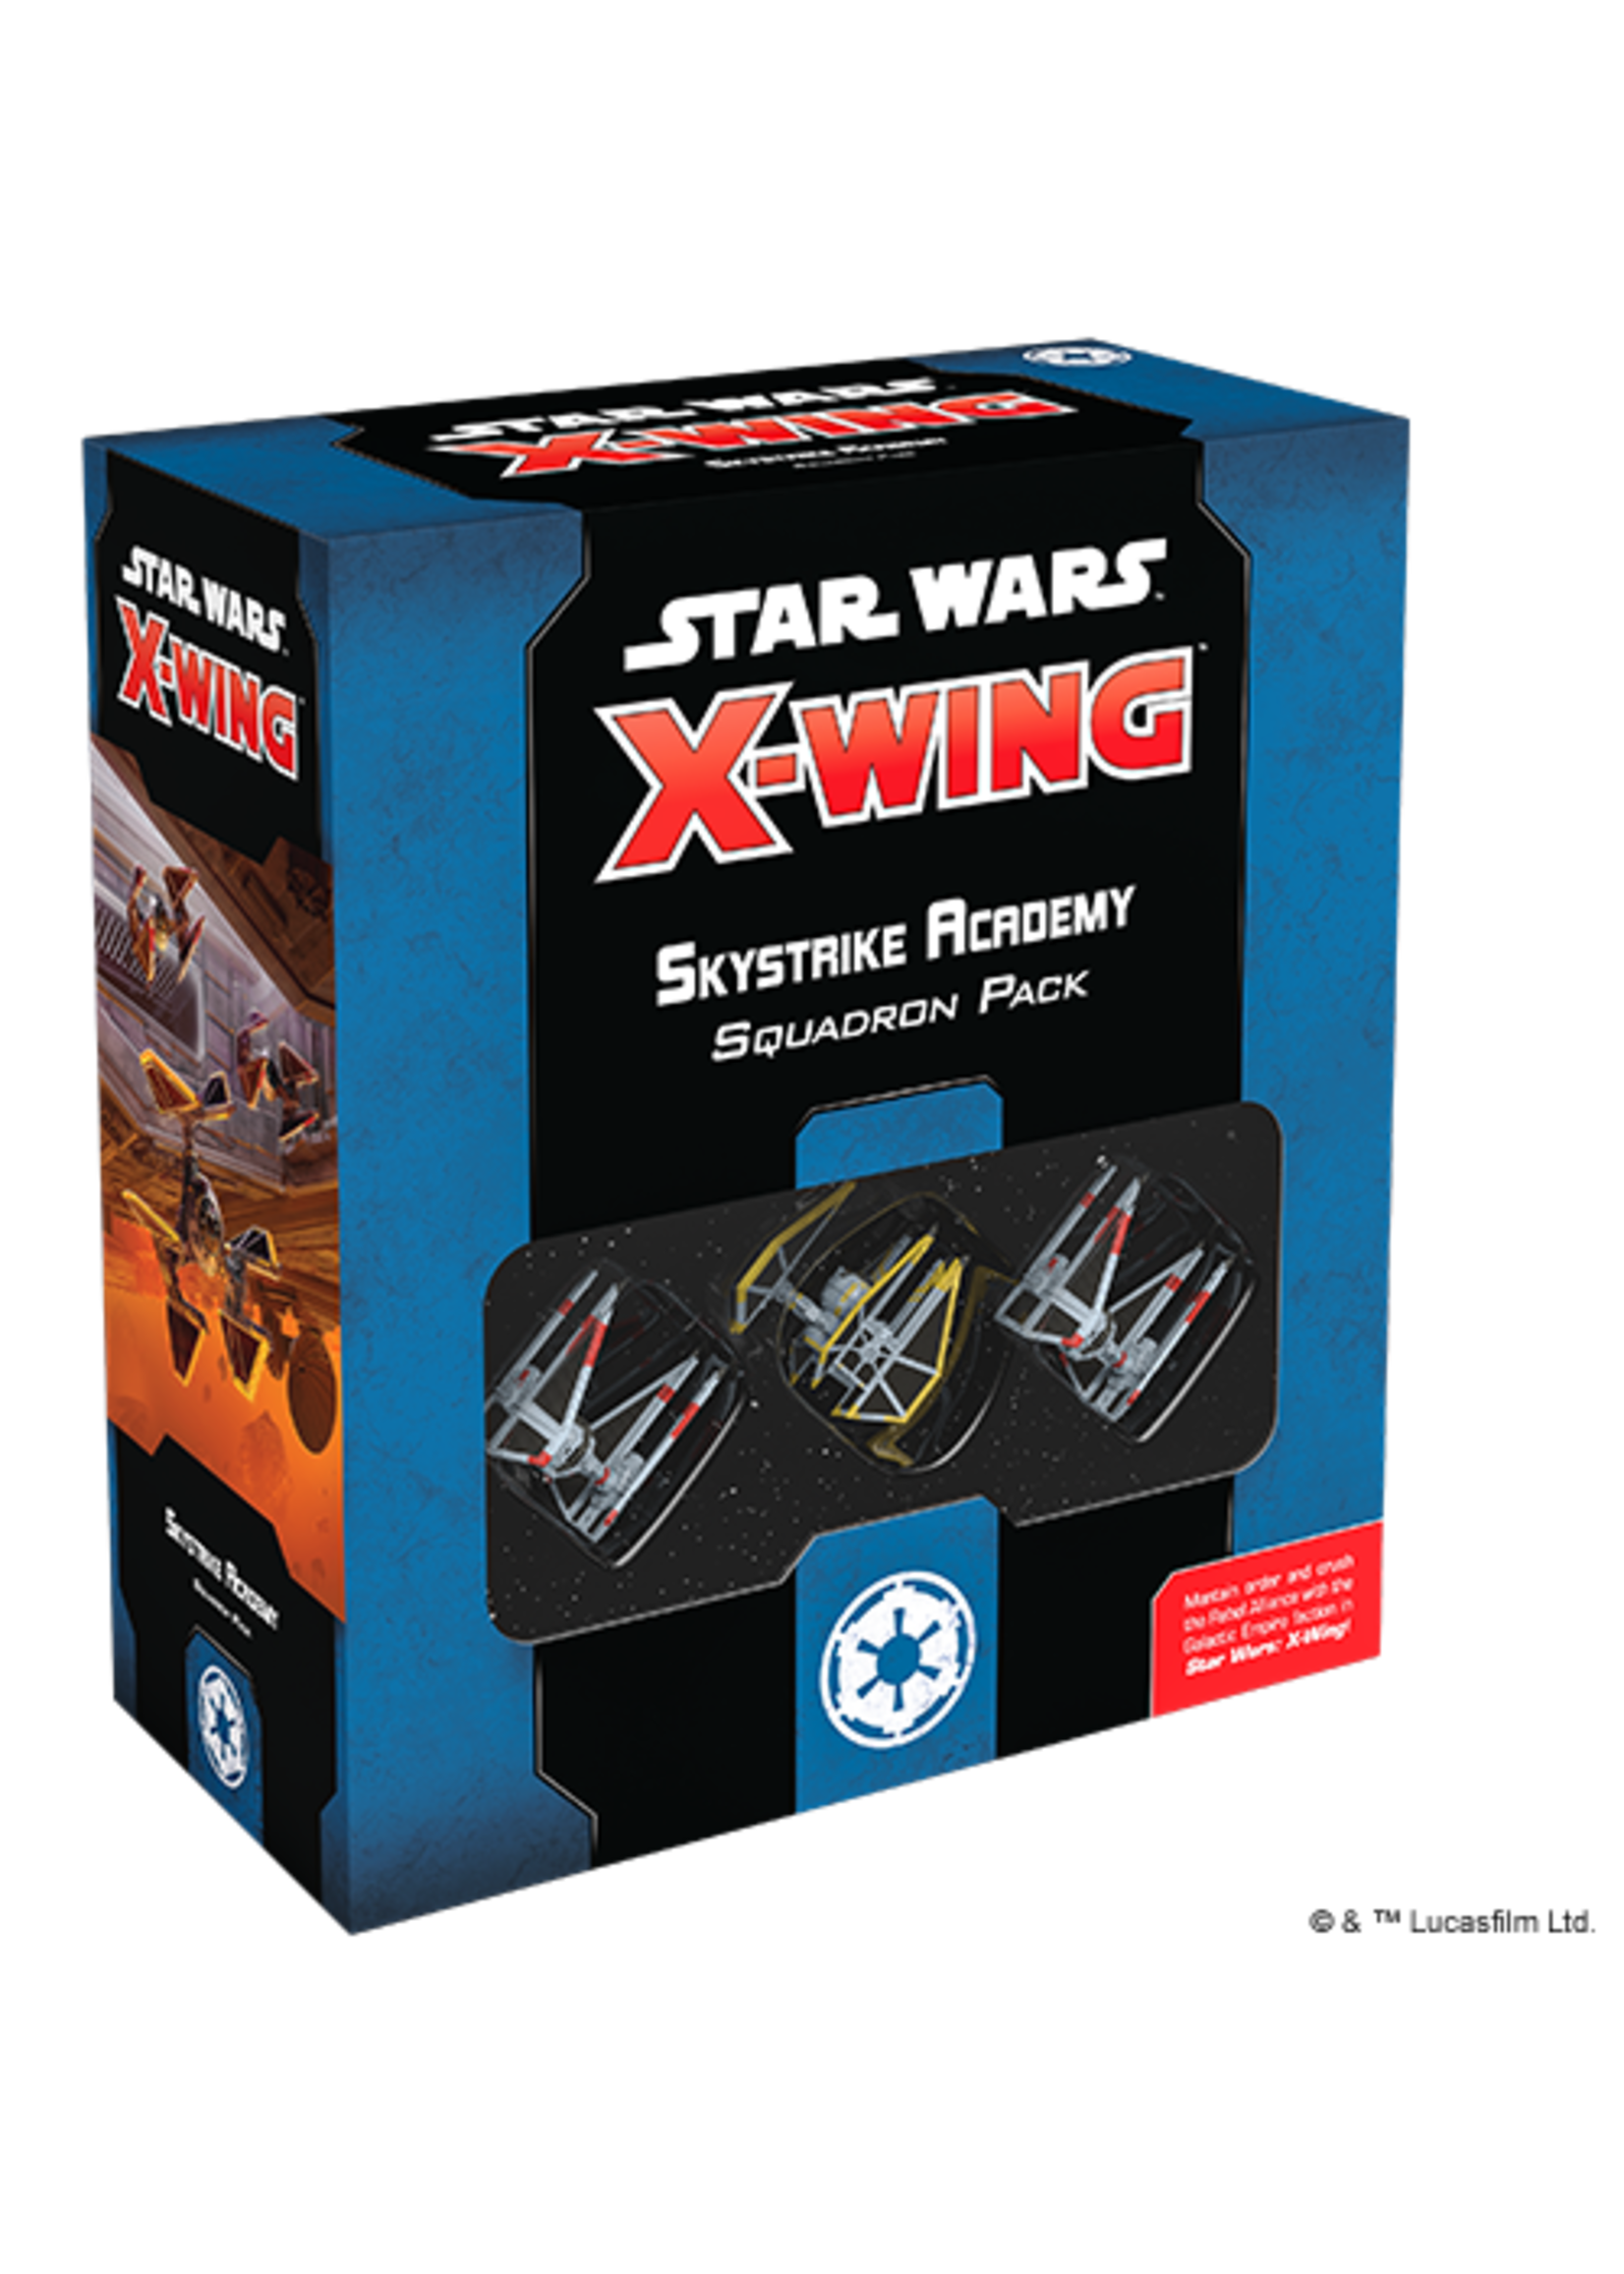 Star Wars X wing Skystrike Academy Squadron Pack